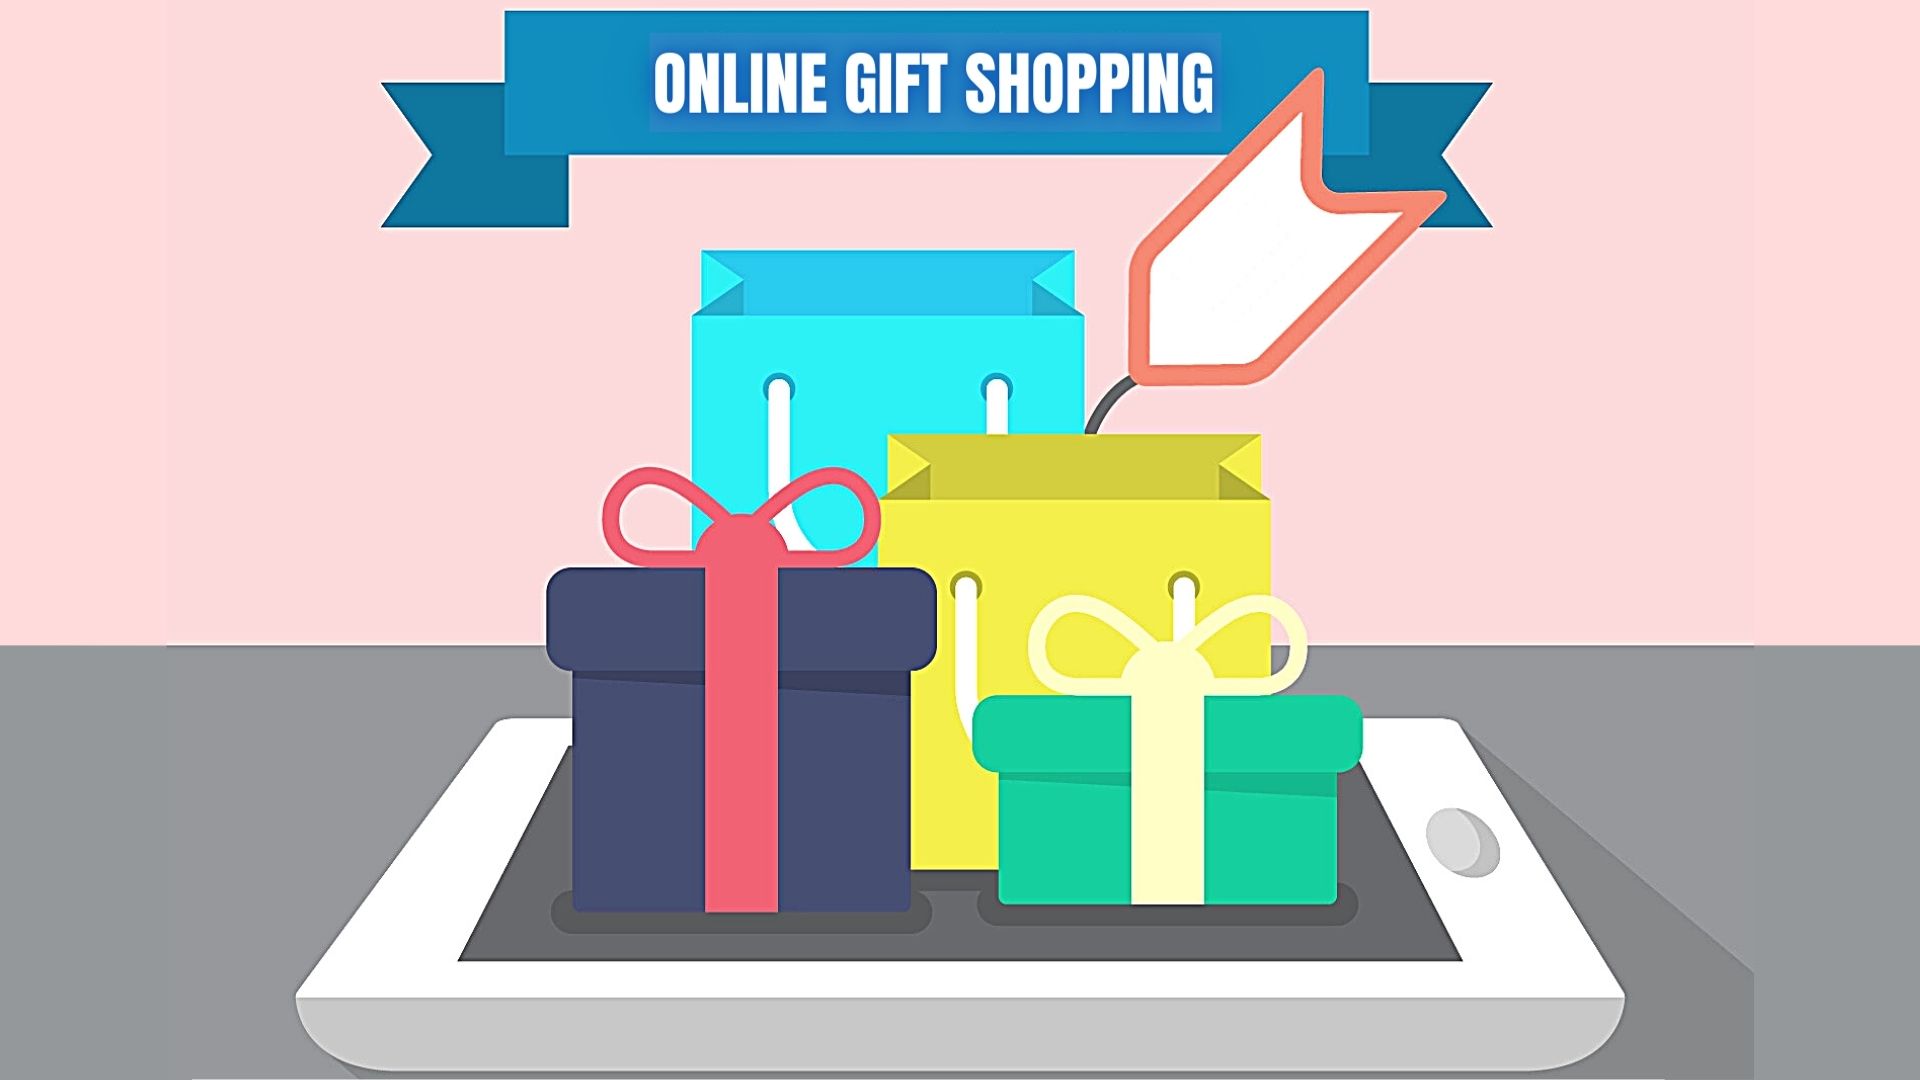 About Online Gift Shopping